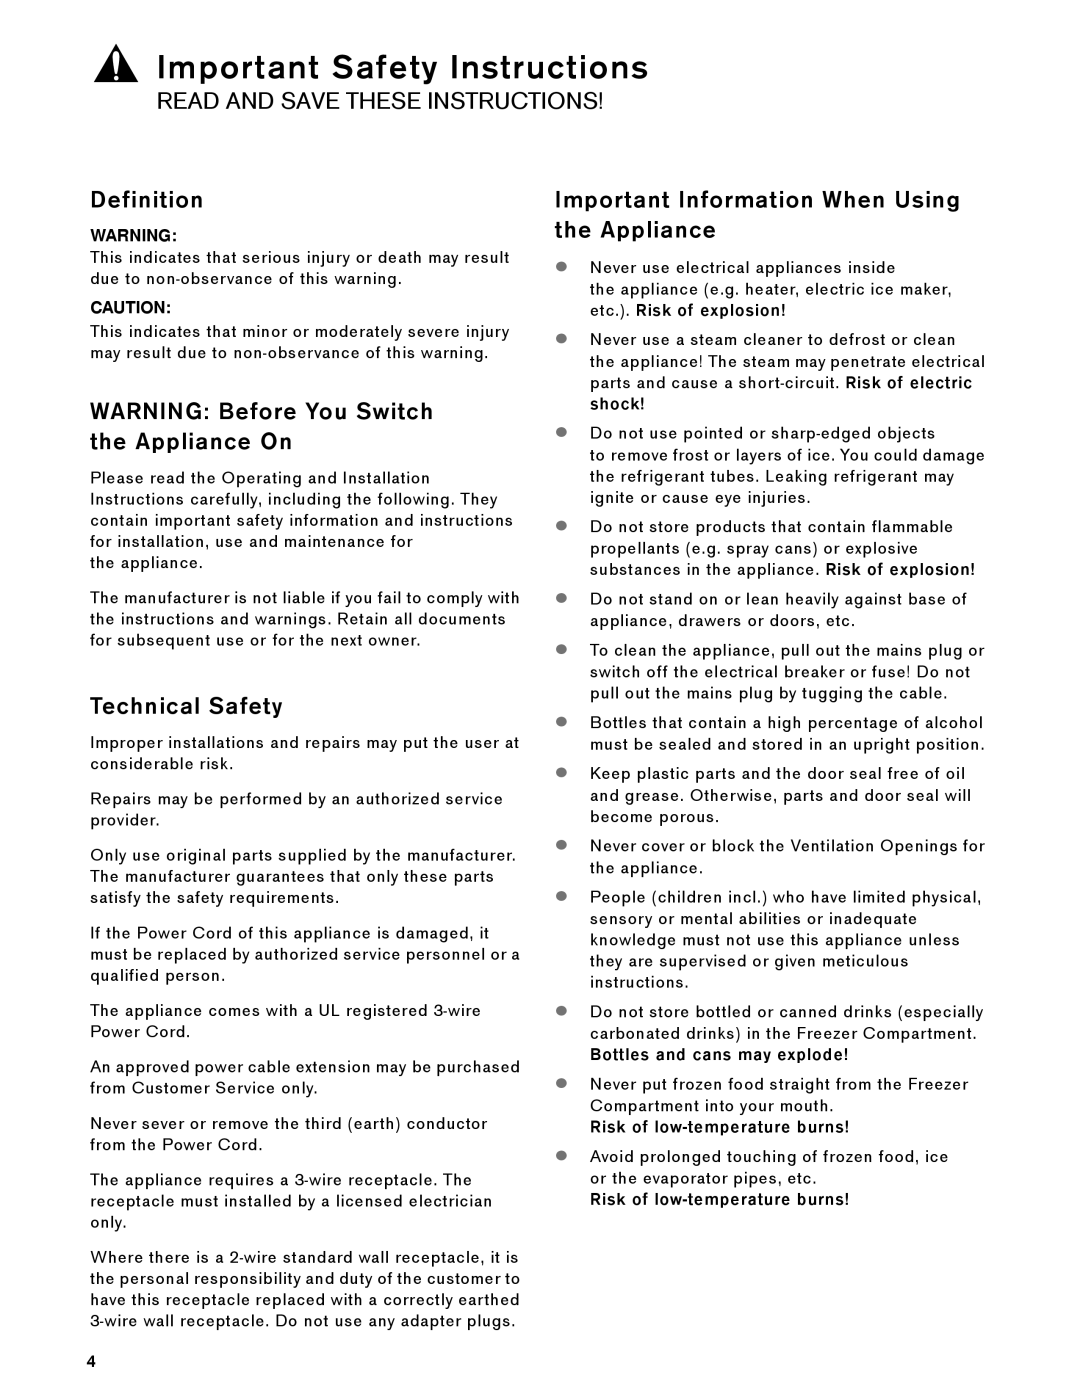 Gaggenau RF 413, RF 461 manual Important Safety Instructions, Read And Save These Instructions, Definition, Technical Safety 